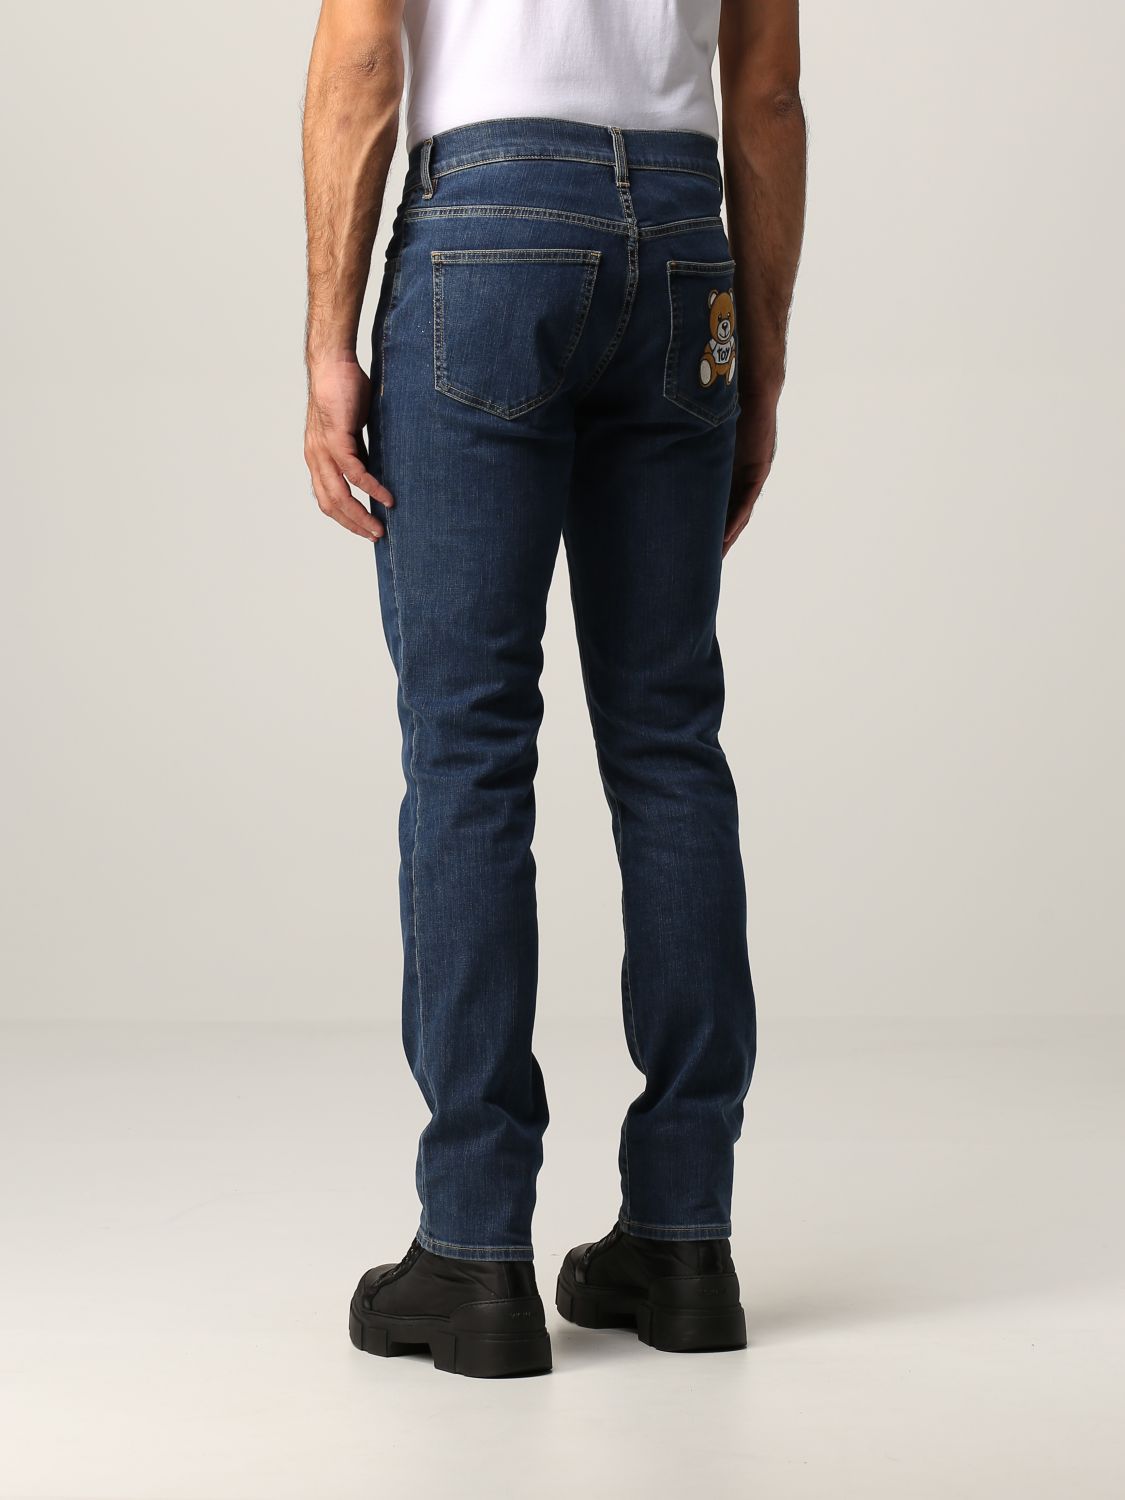 Jeans Moschino Couture: Moschino Couture 5-pocket jeans denim 2